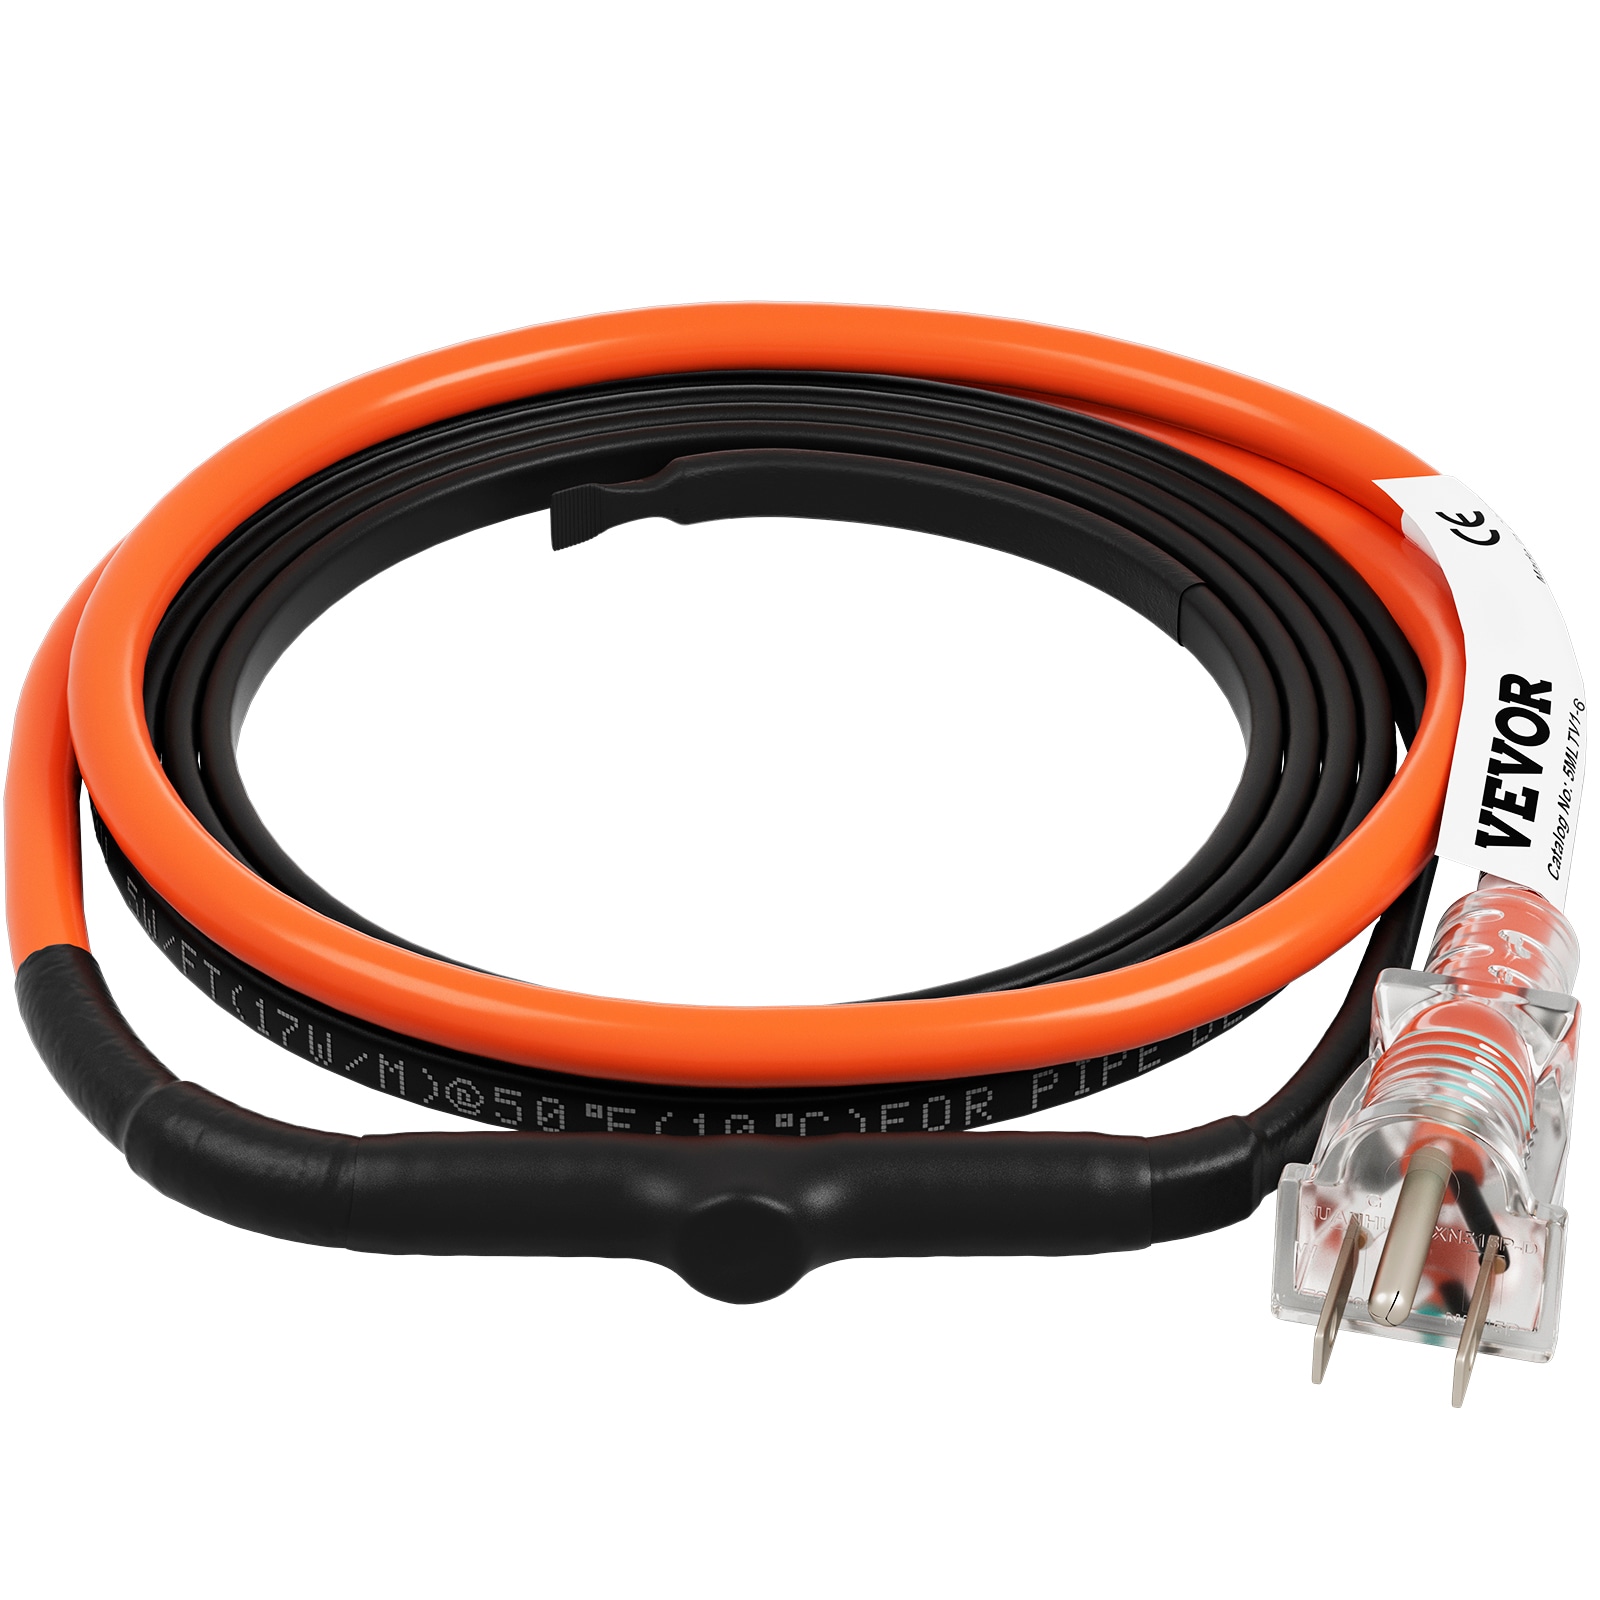 Easy Heat 6 Ft. 120V Pipe Heating Cable